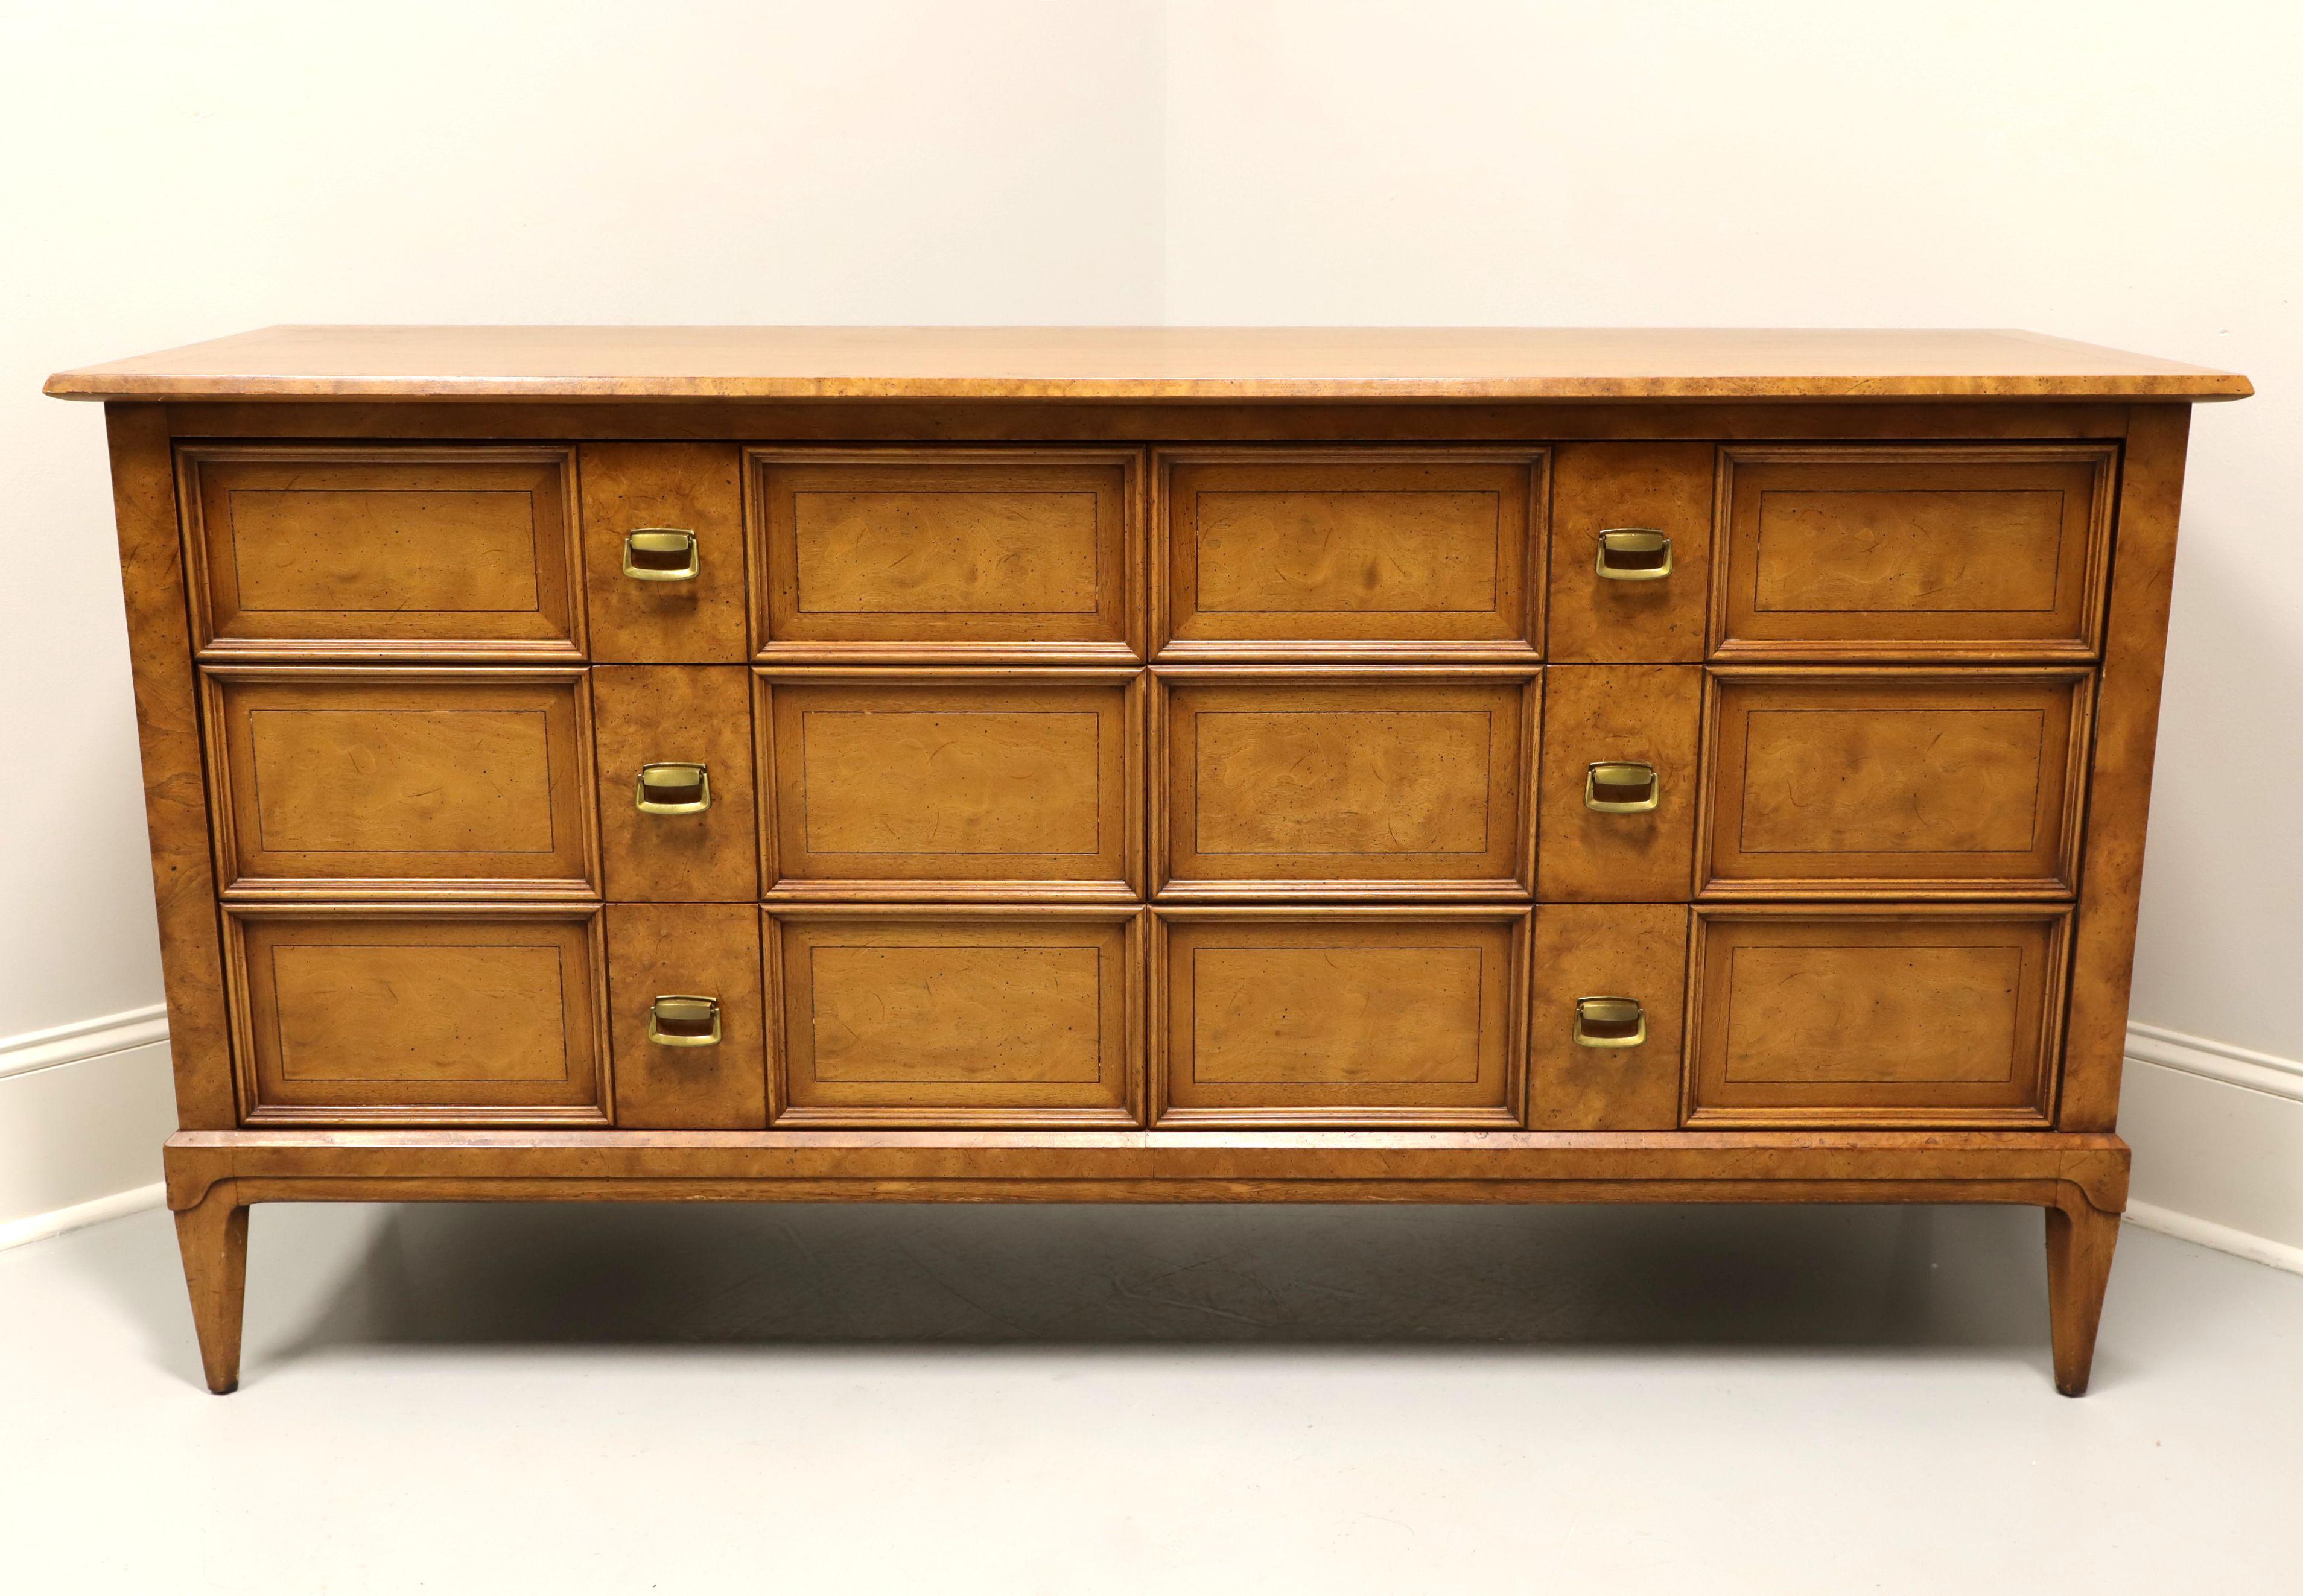 A Mid-20th Century double dresser by Henredon, from their Sequent line. Burlwood, hardwood, brass hardware, burlwood banded top, clean mid-century lines and spade feet. Features six drawers of dovetail construction, two middle drawers having a